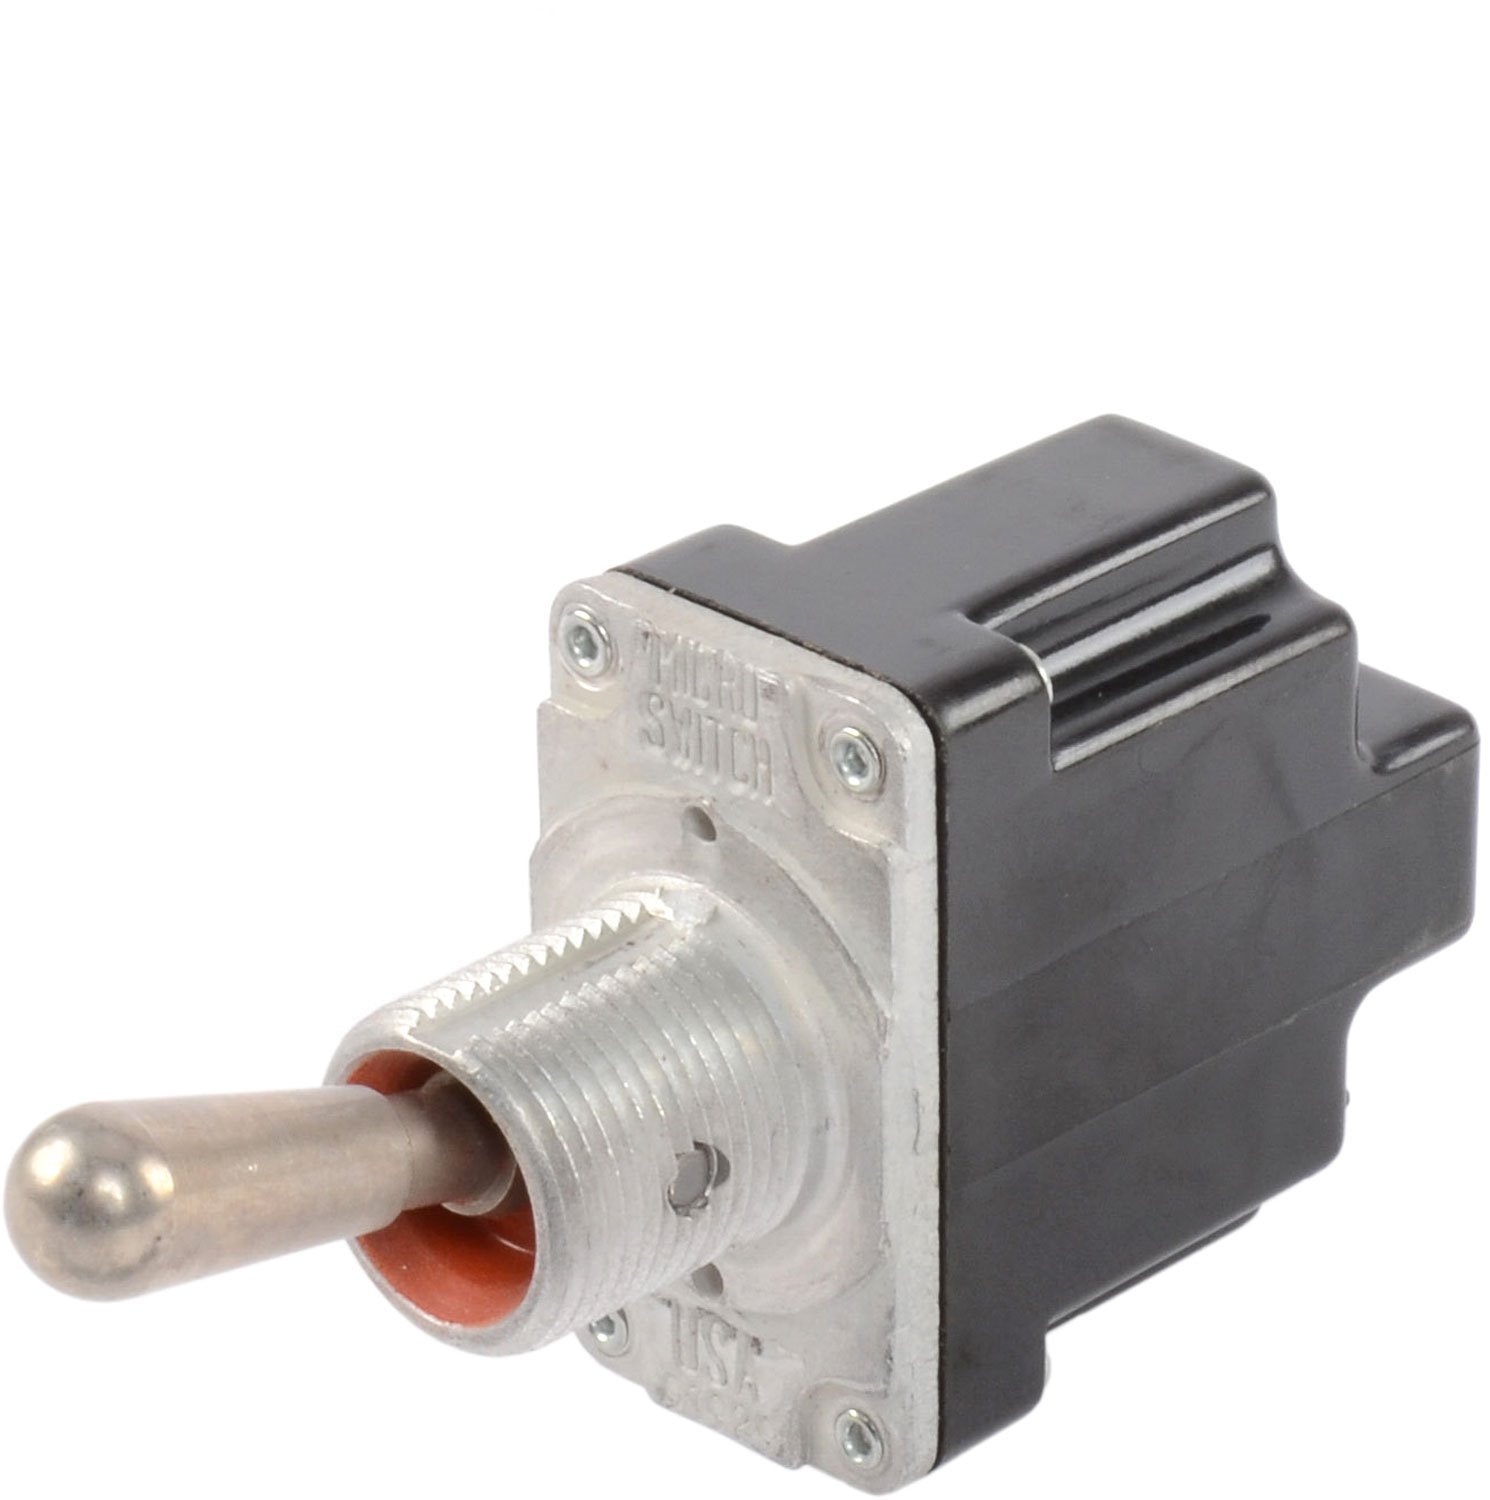 Military Spec Waterproof Toggle Switch 20 Amp Maintained On/Off